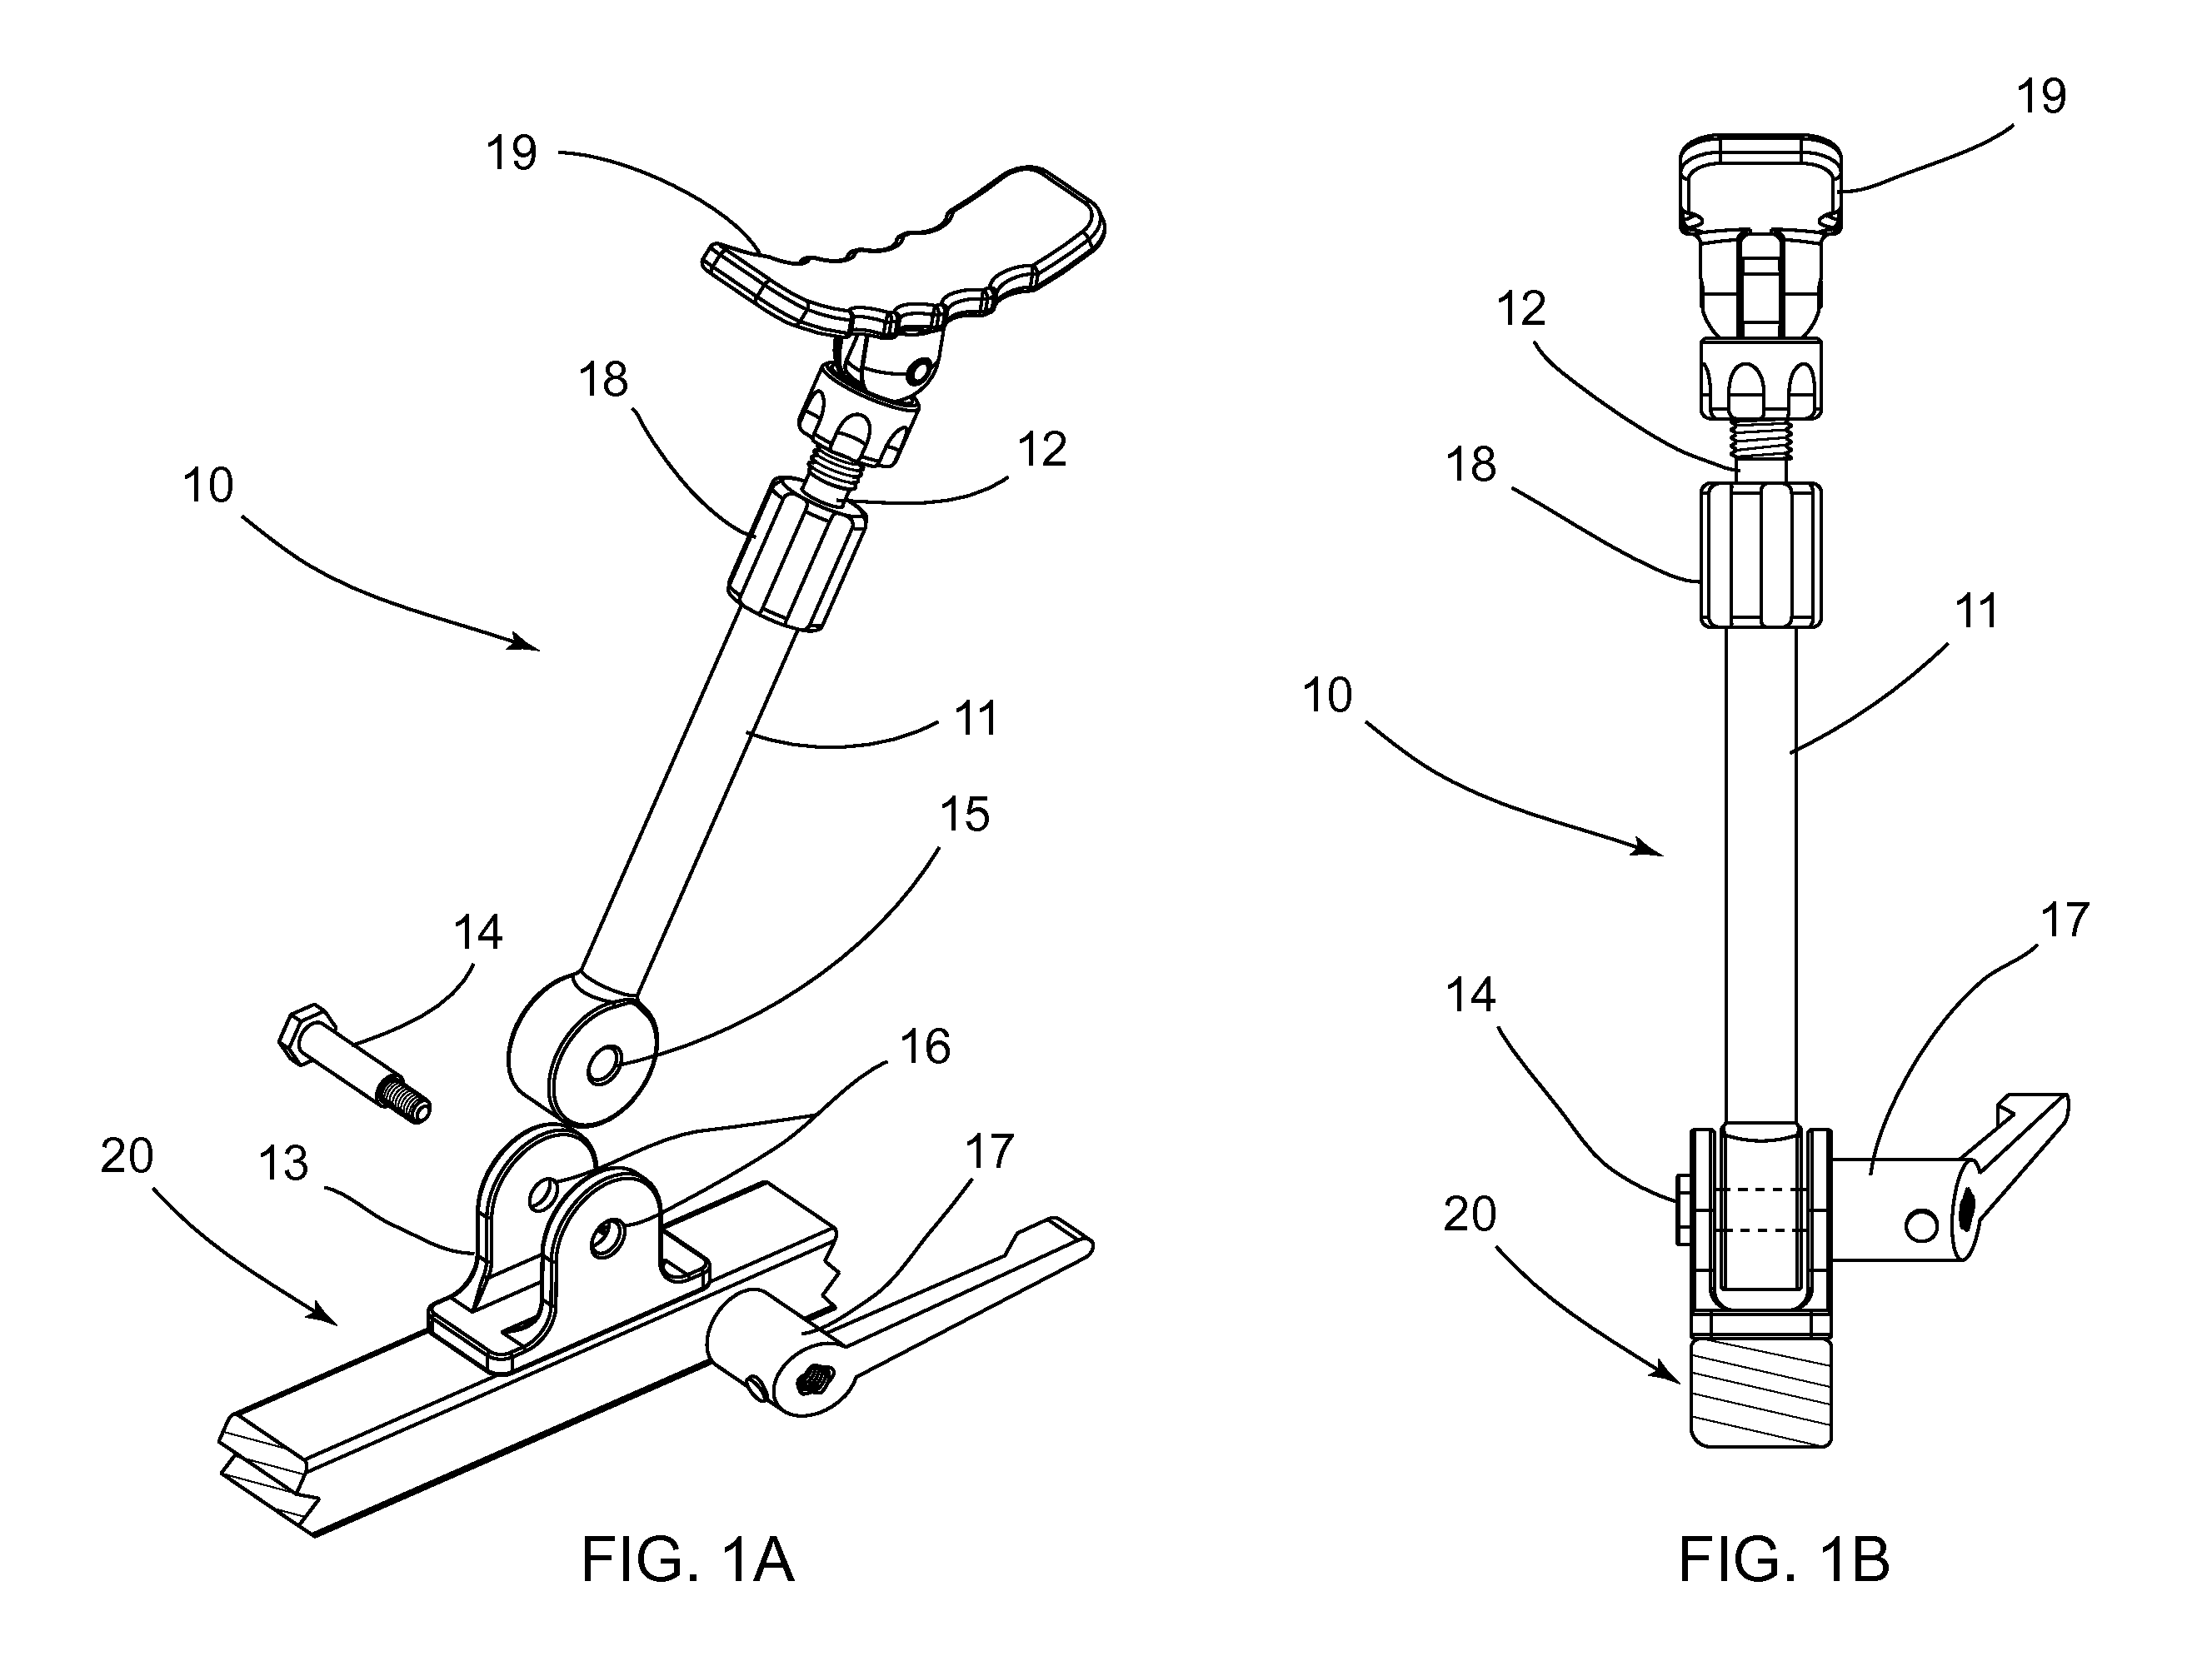 Extremity support apparatus